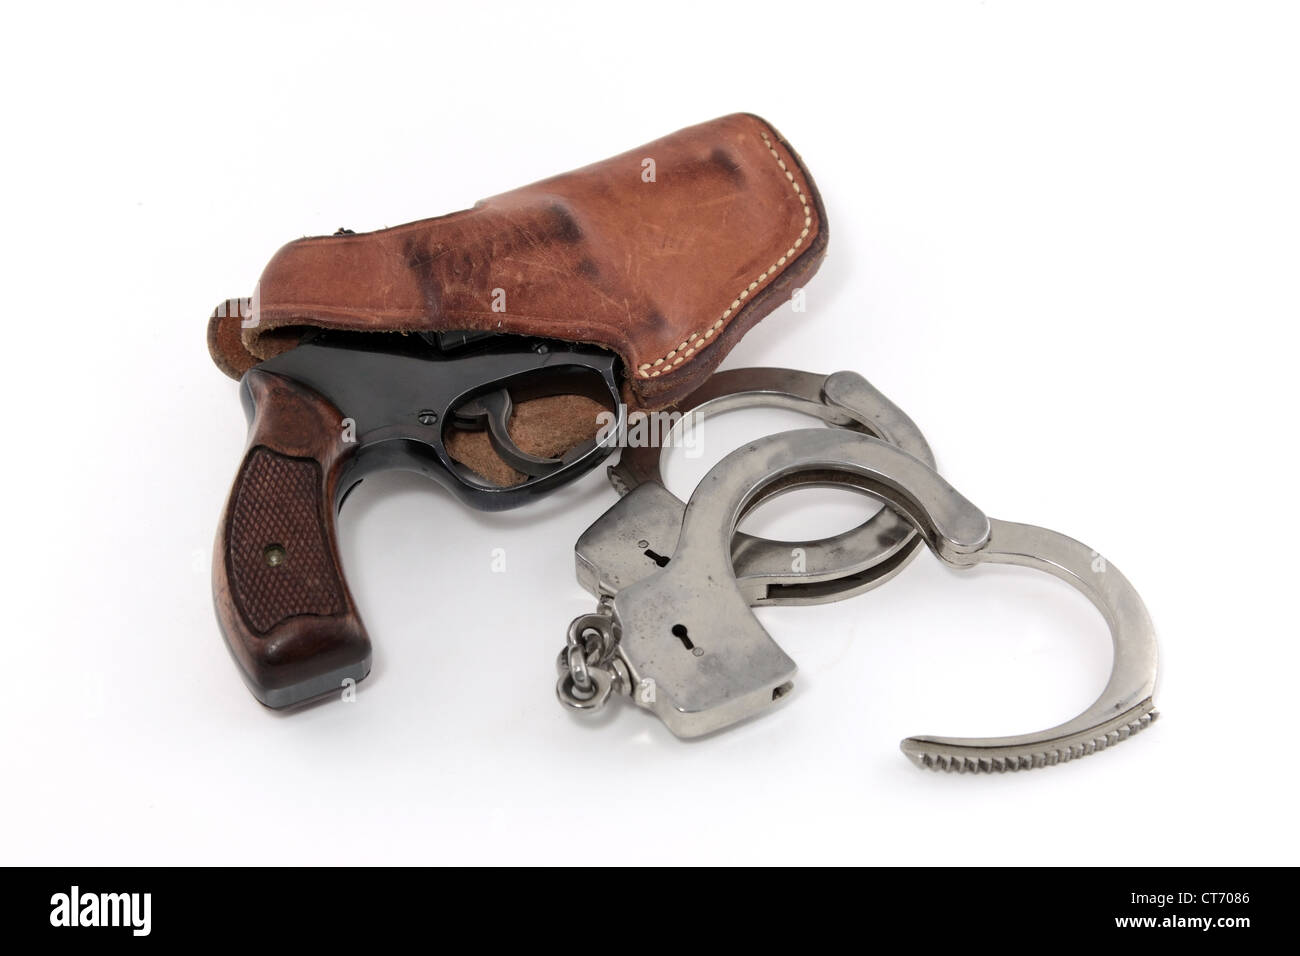 Vintage revolver in leather holster with handcuffs on white background Stock Photo